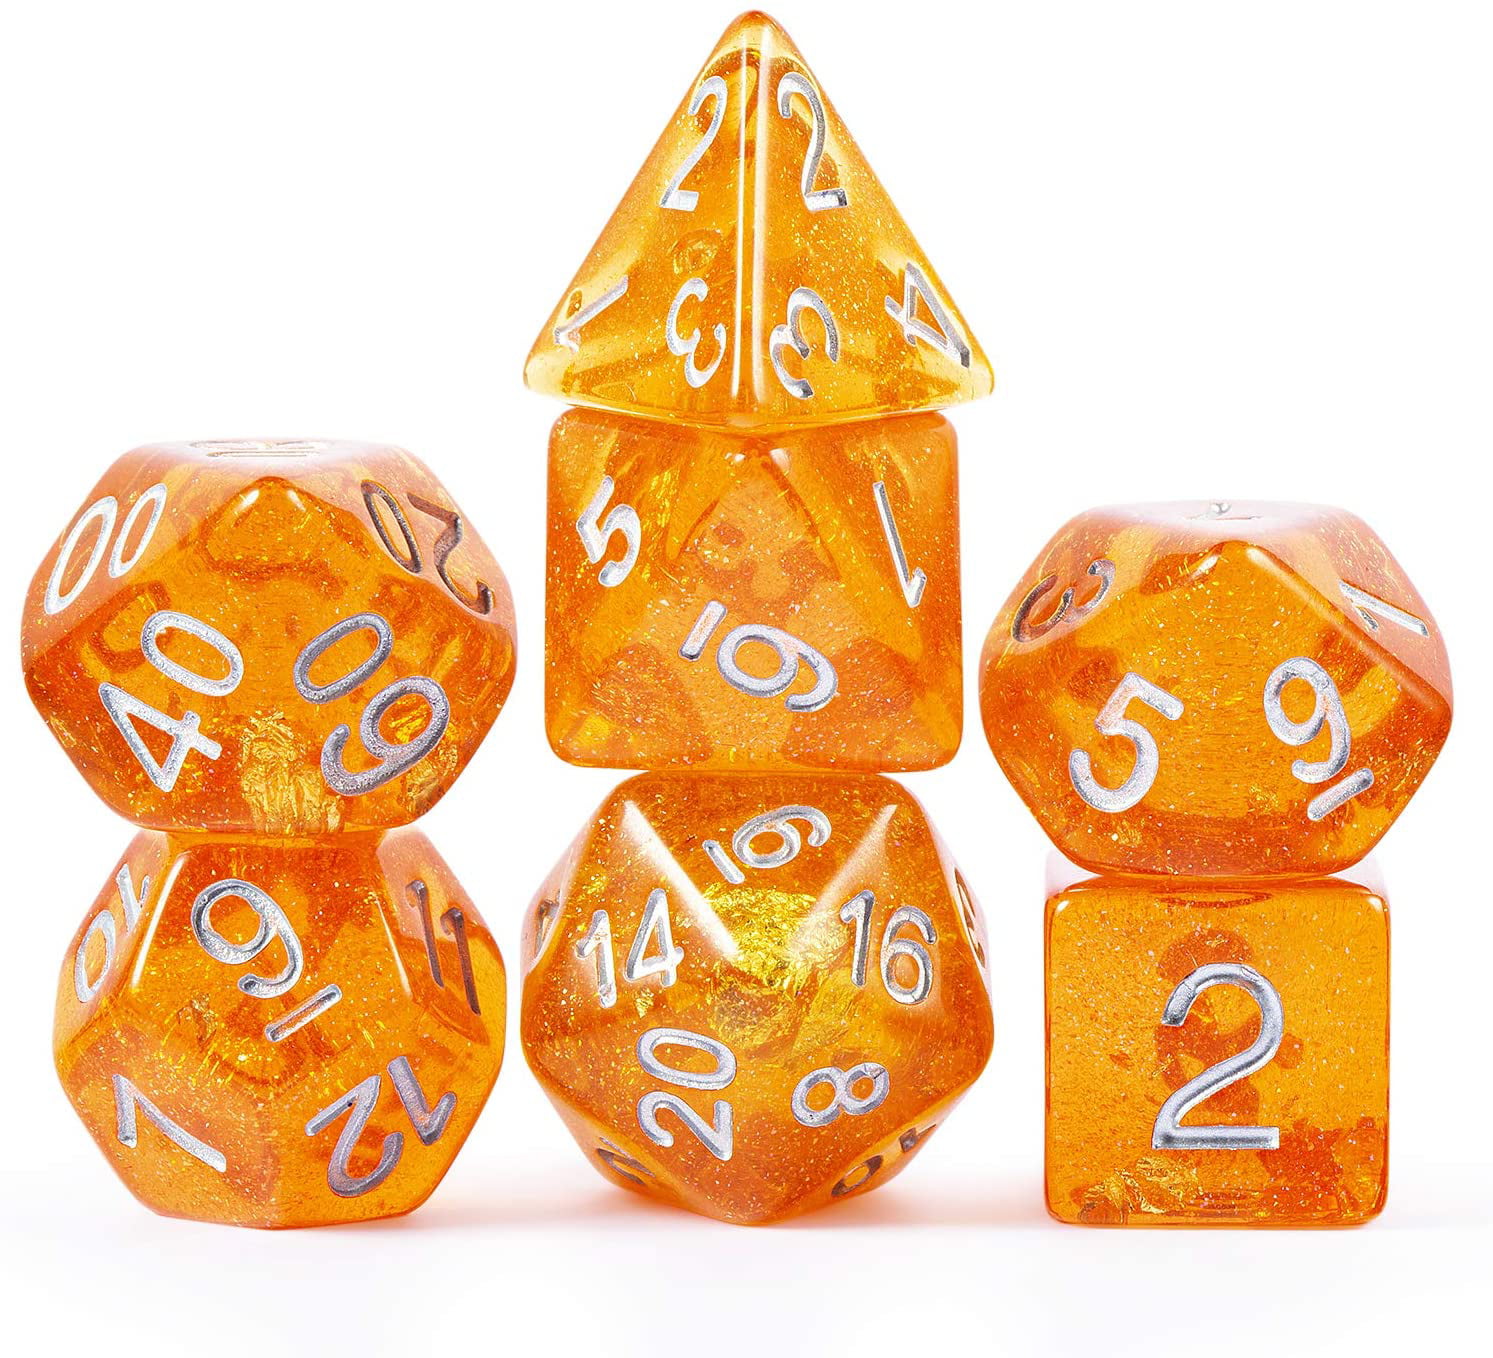 7×Polyhedral Dice For Dungeons And Dragons Dice DND RPG MTG Red Orange New 2018 